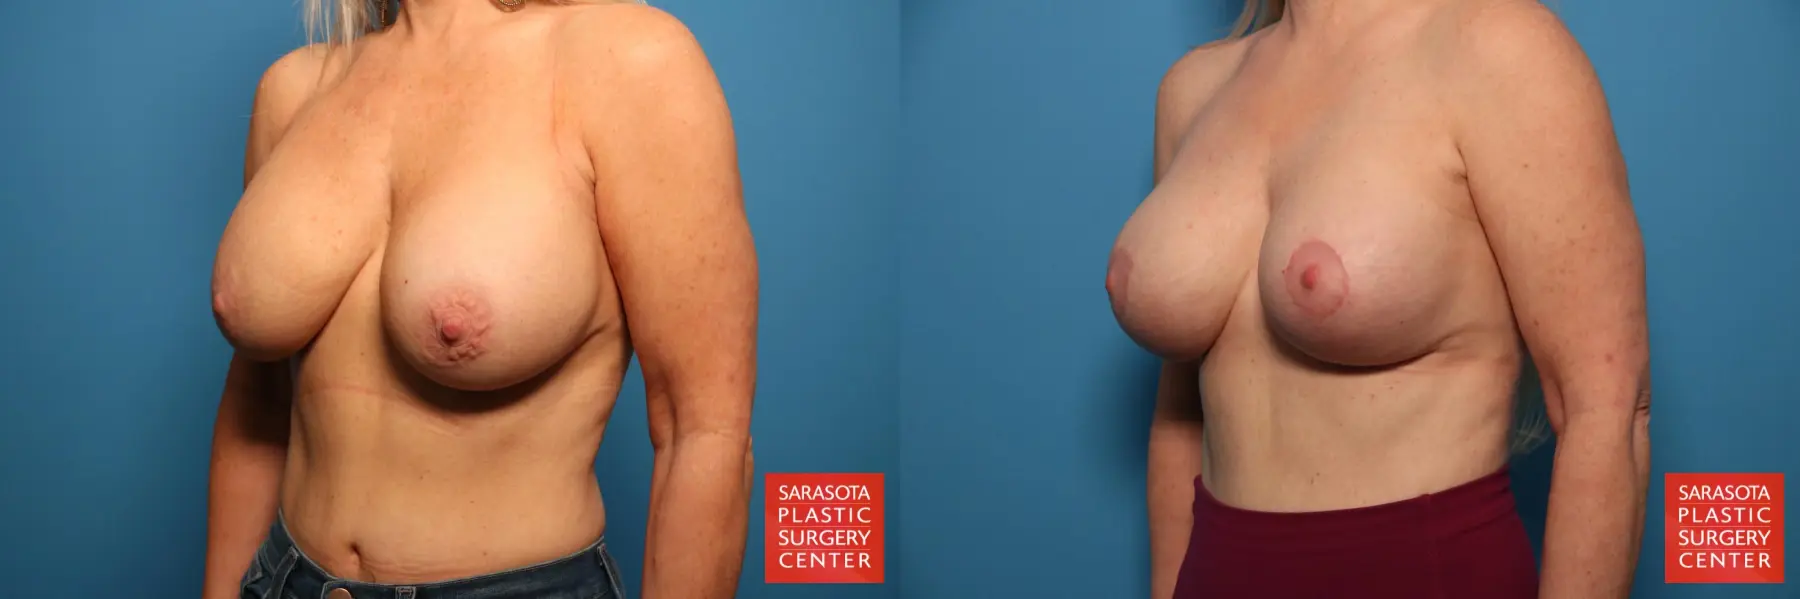 Breast Revision: Patient 1 - Before and After 2